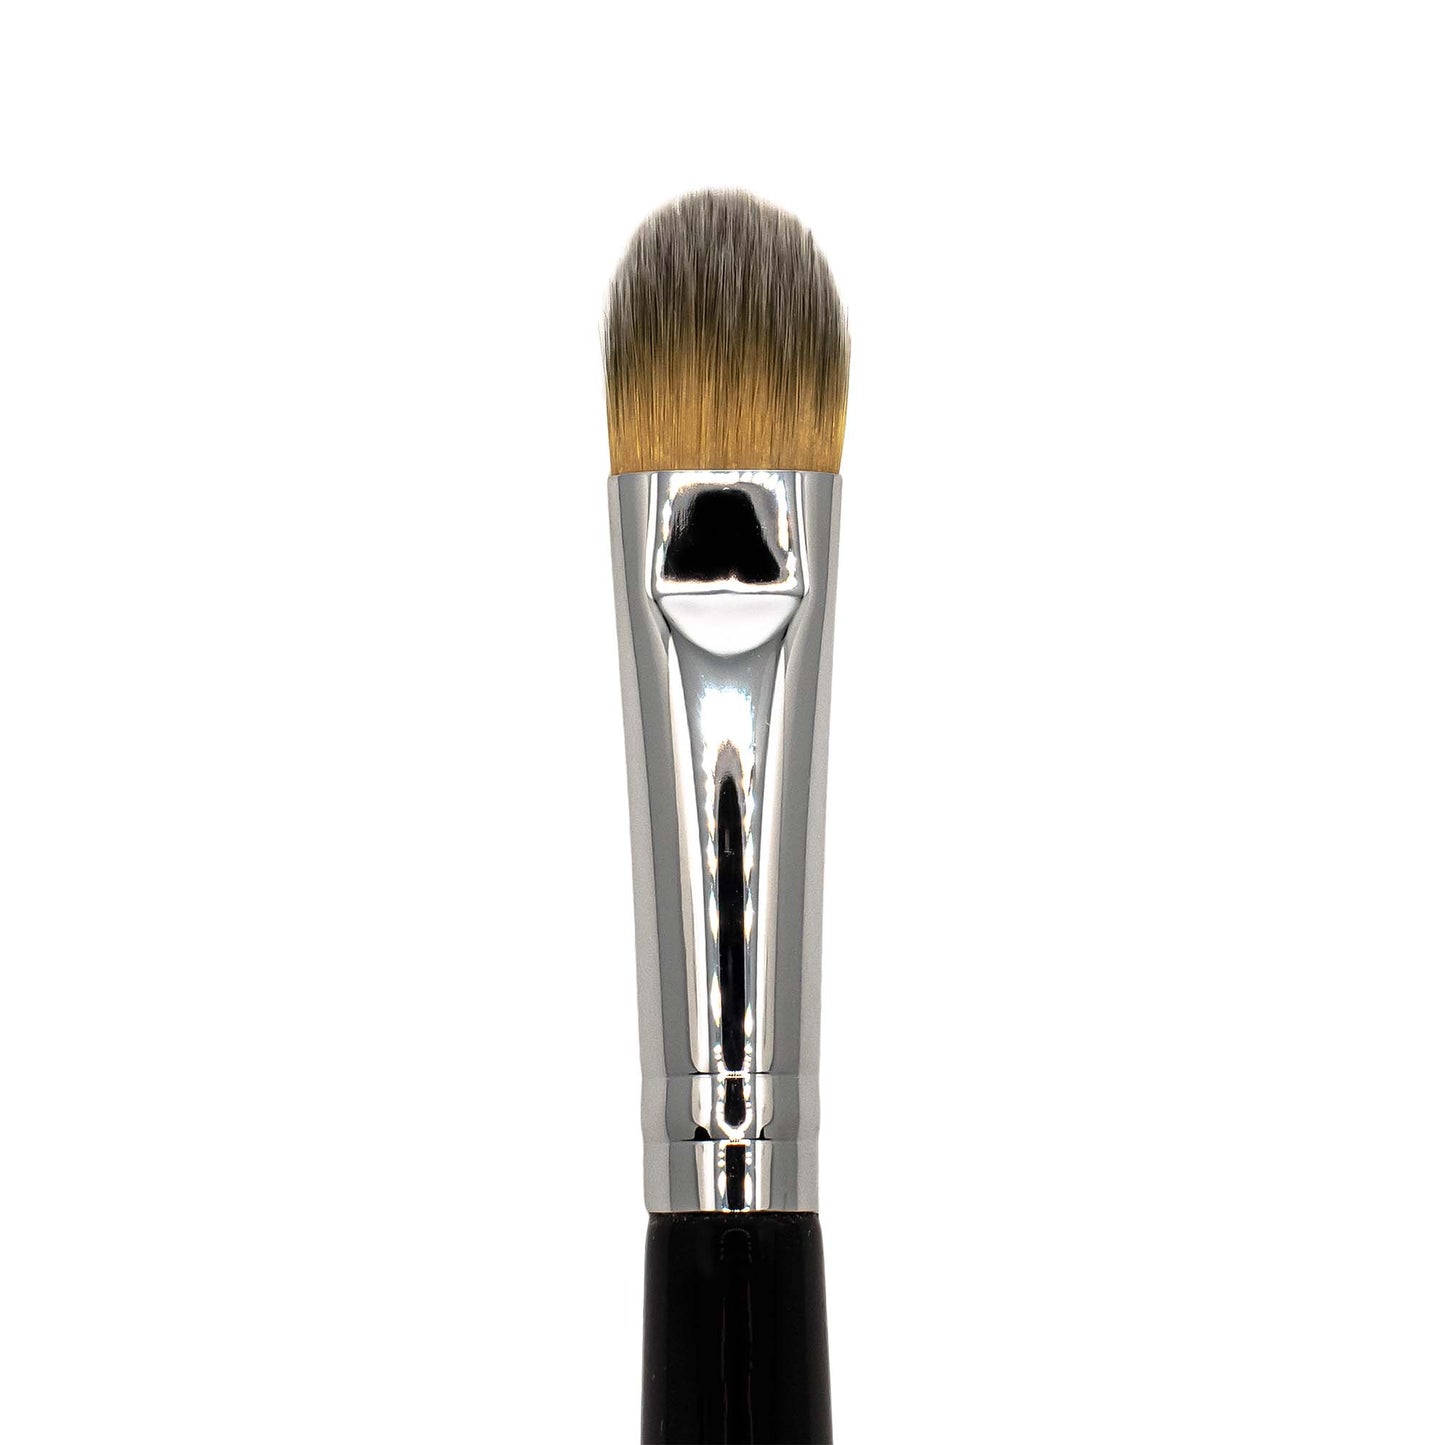 Expertly crafted with top-notch materials, the Cruisin Organics concealer brush boasts gentle, short, and firm bristles that effortlessly apply and blend both cream and liquid concealers.